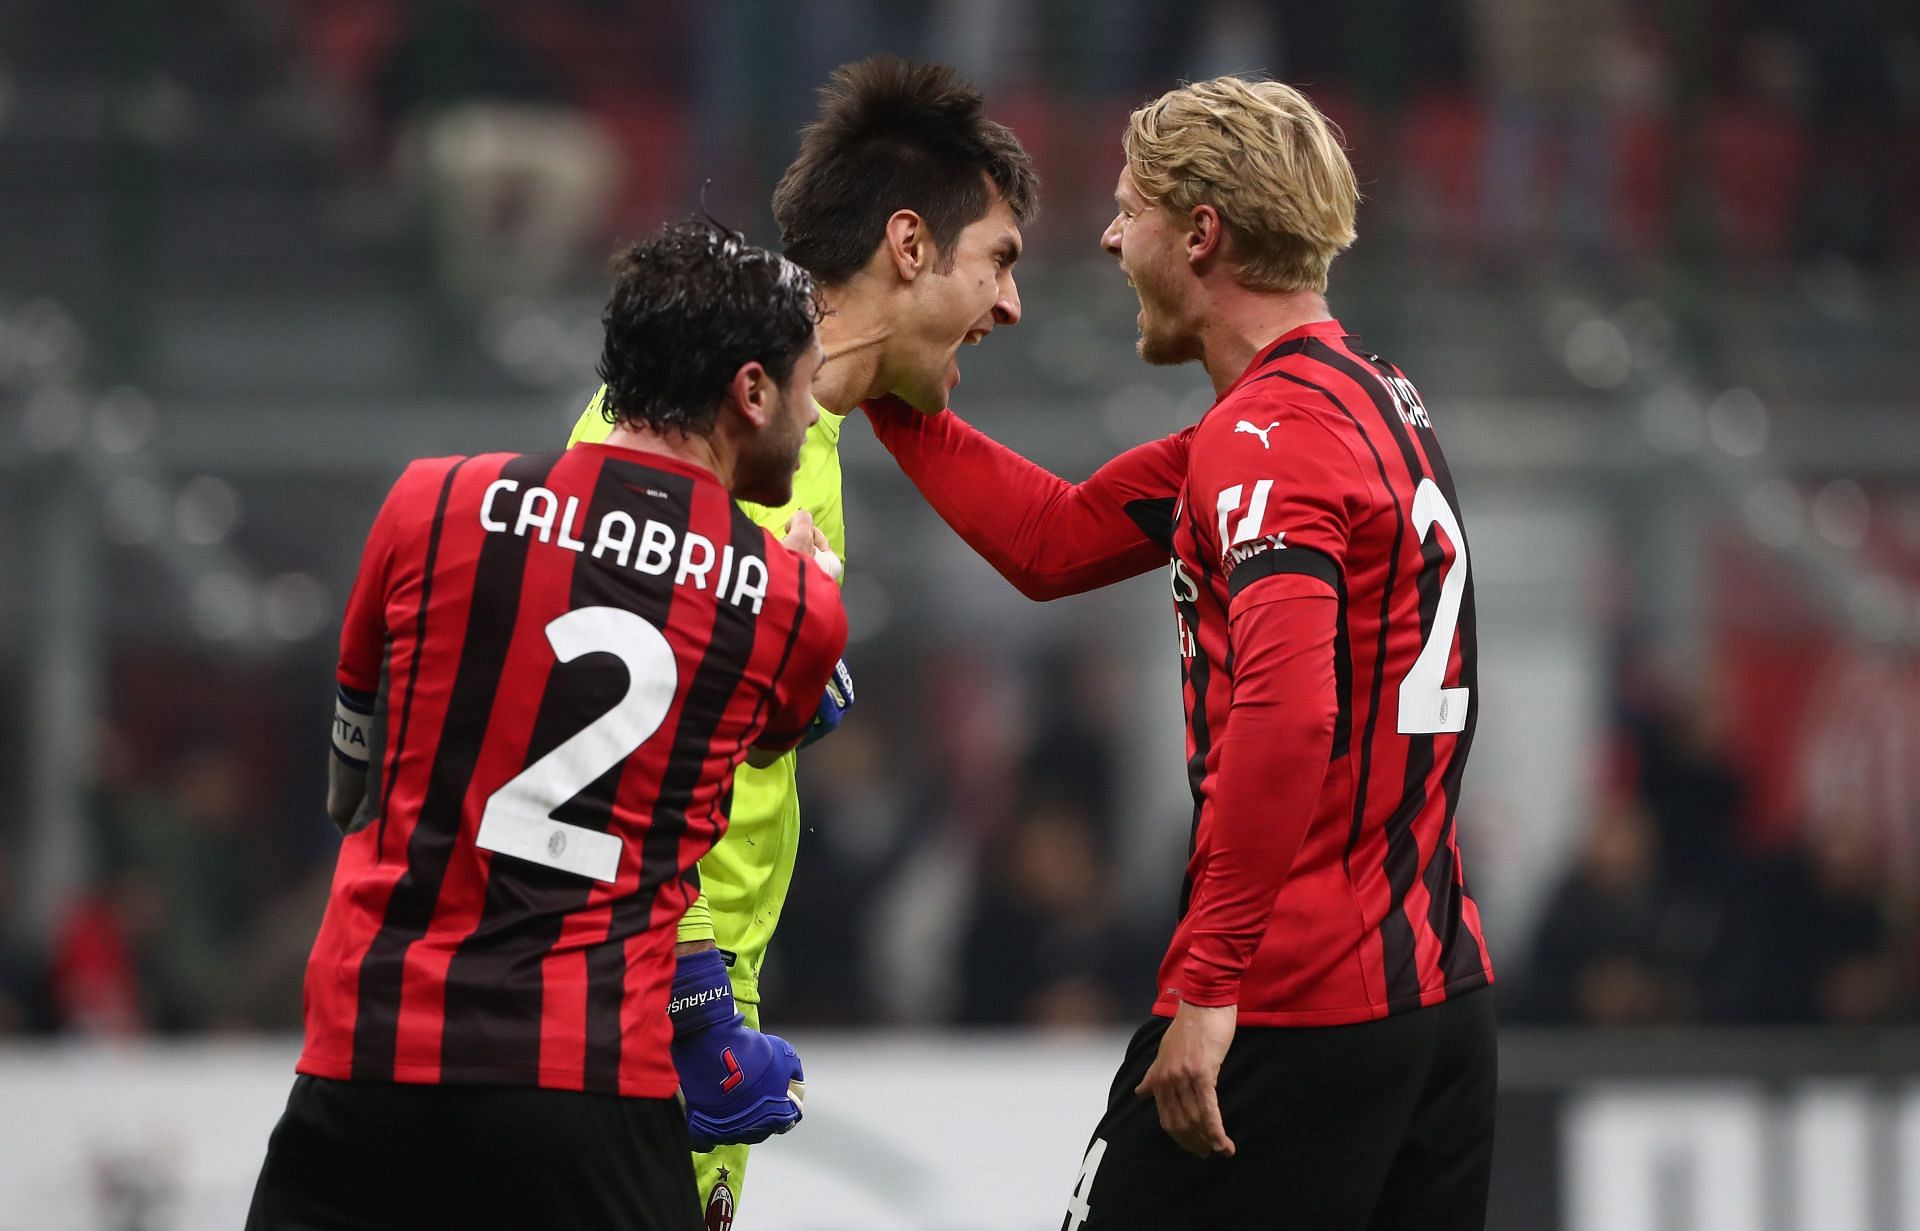 AC Milan have struggled on their return to the Champions League fold.